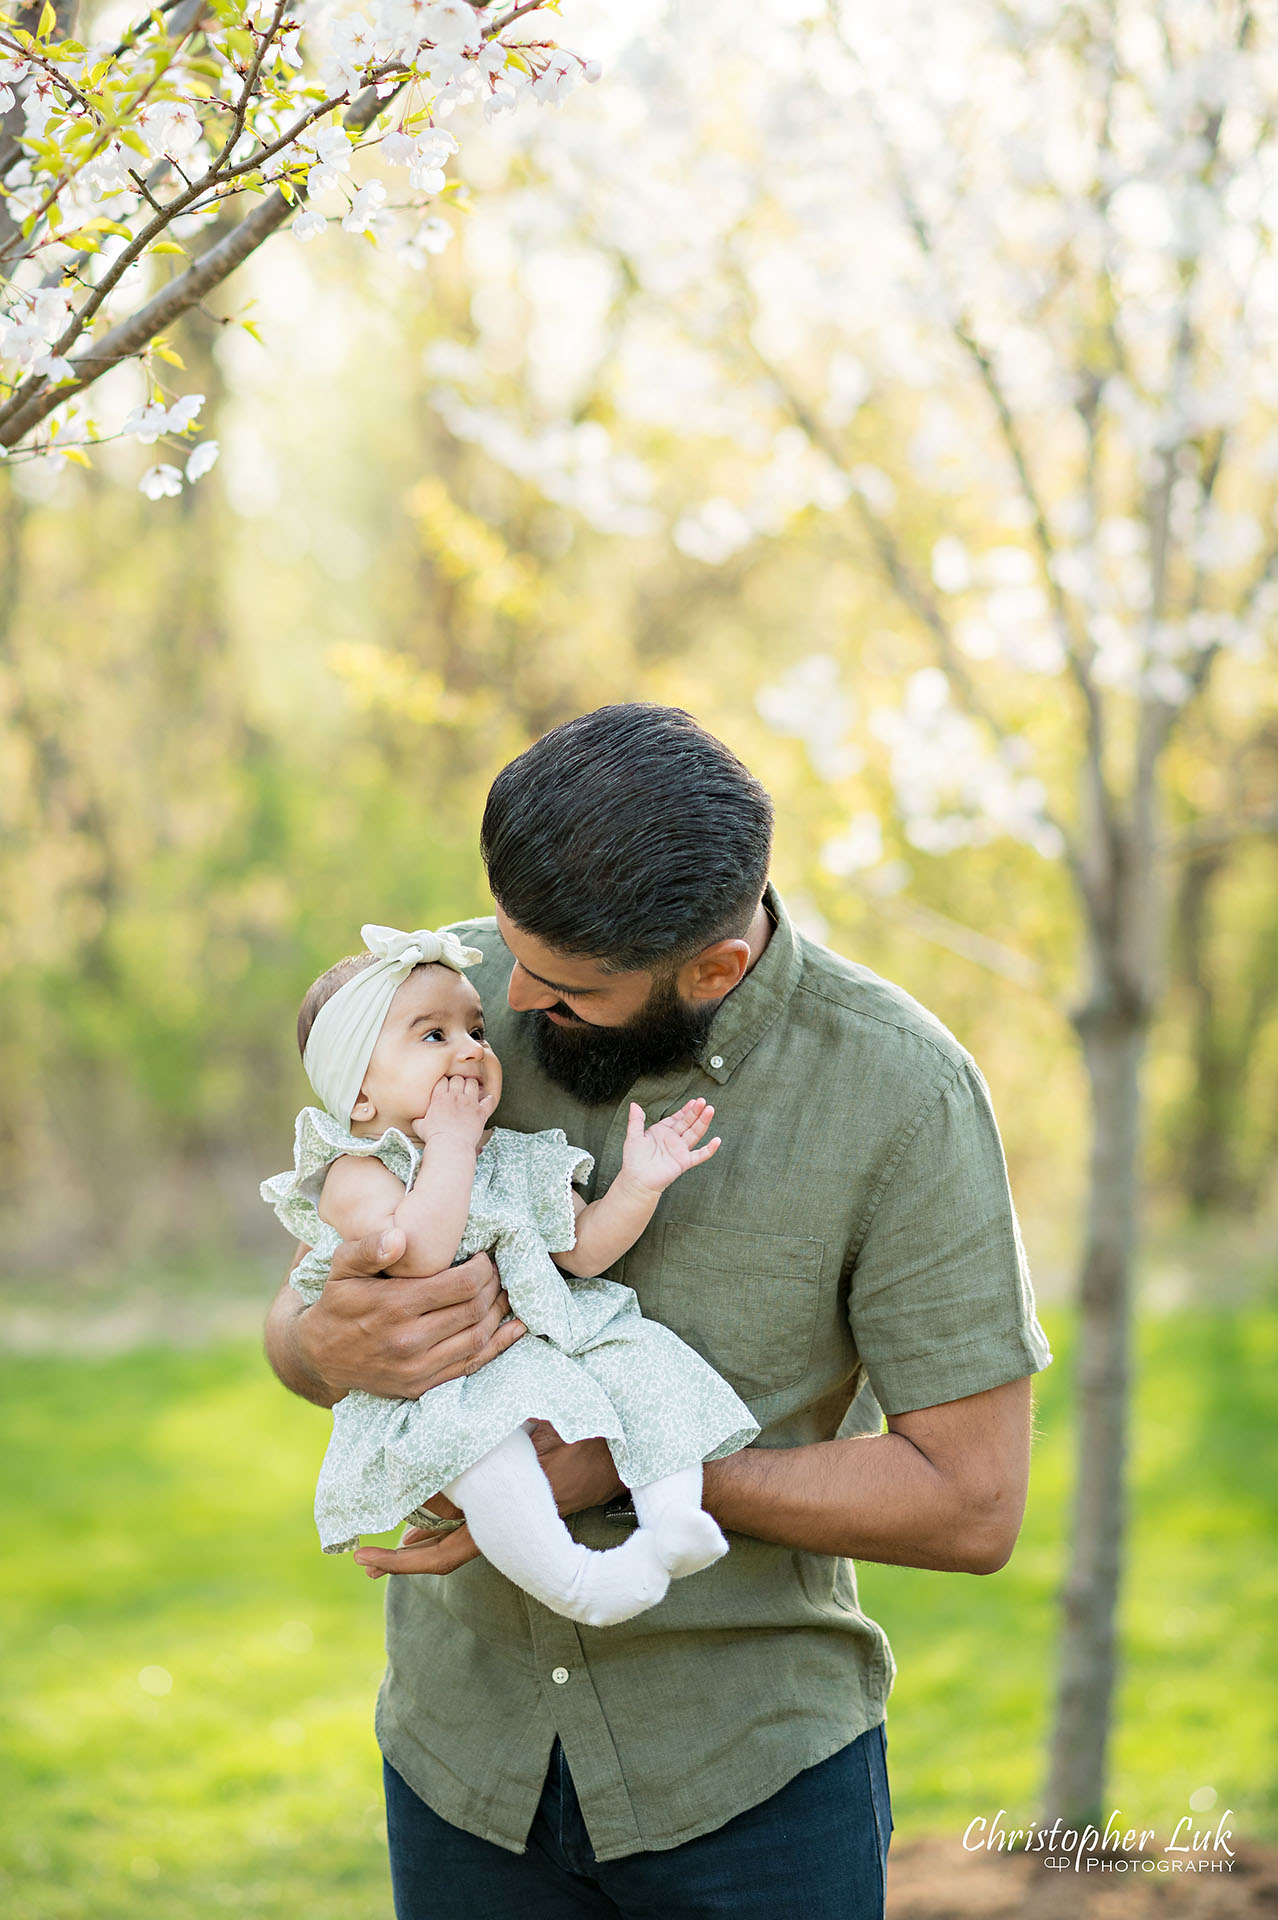 Christopher Luk Toronto Family Photographer Cherry Blossoms Dad Daddy Fatherhood Baby Portrait Candid Natural Photojournalistic Organic Cute Sweet